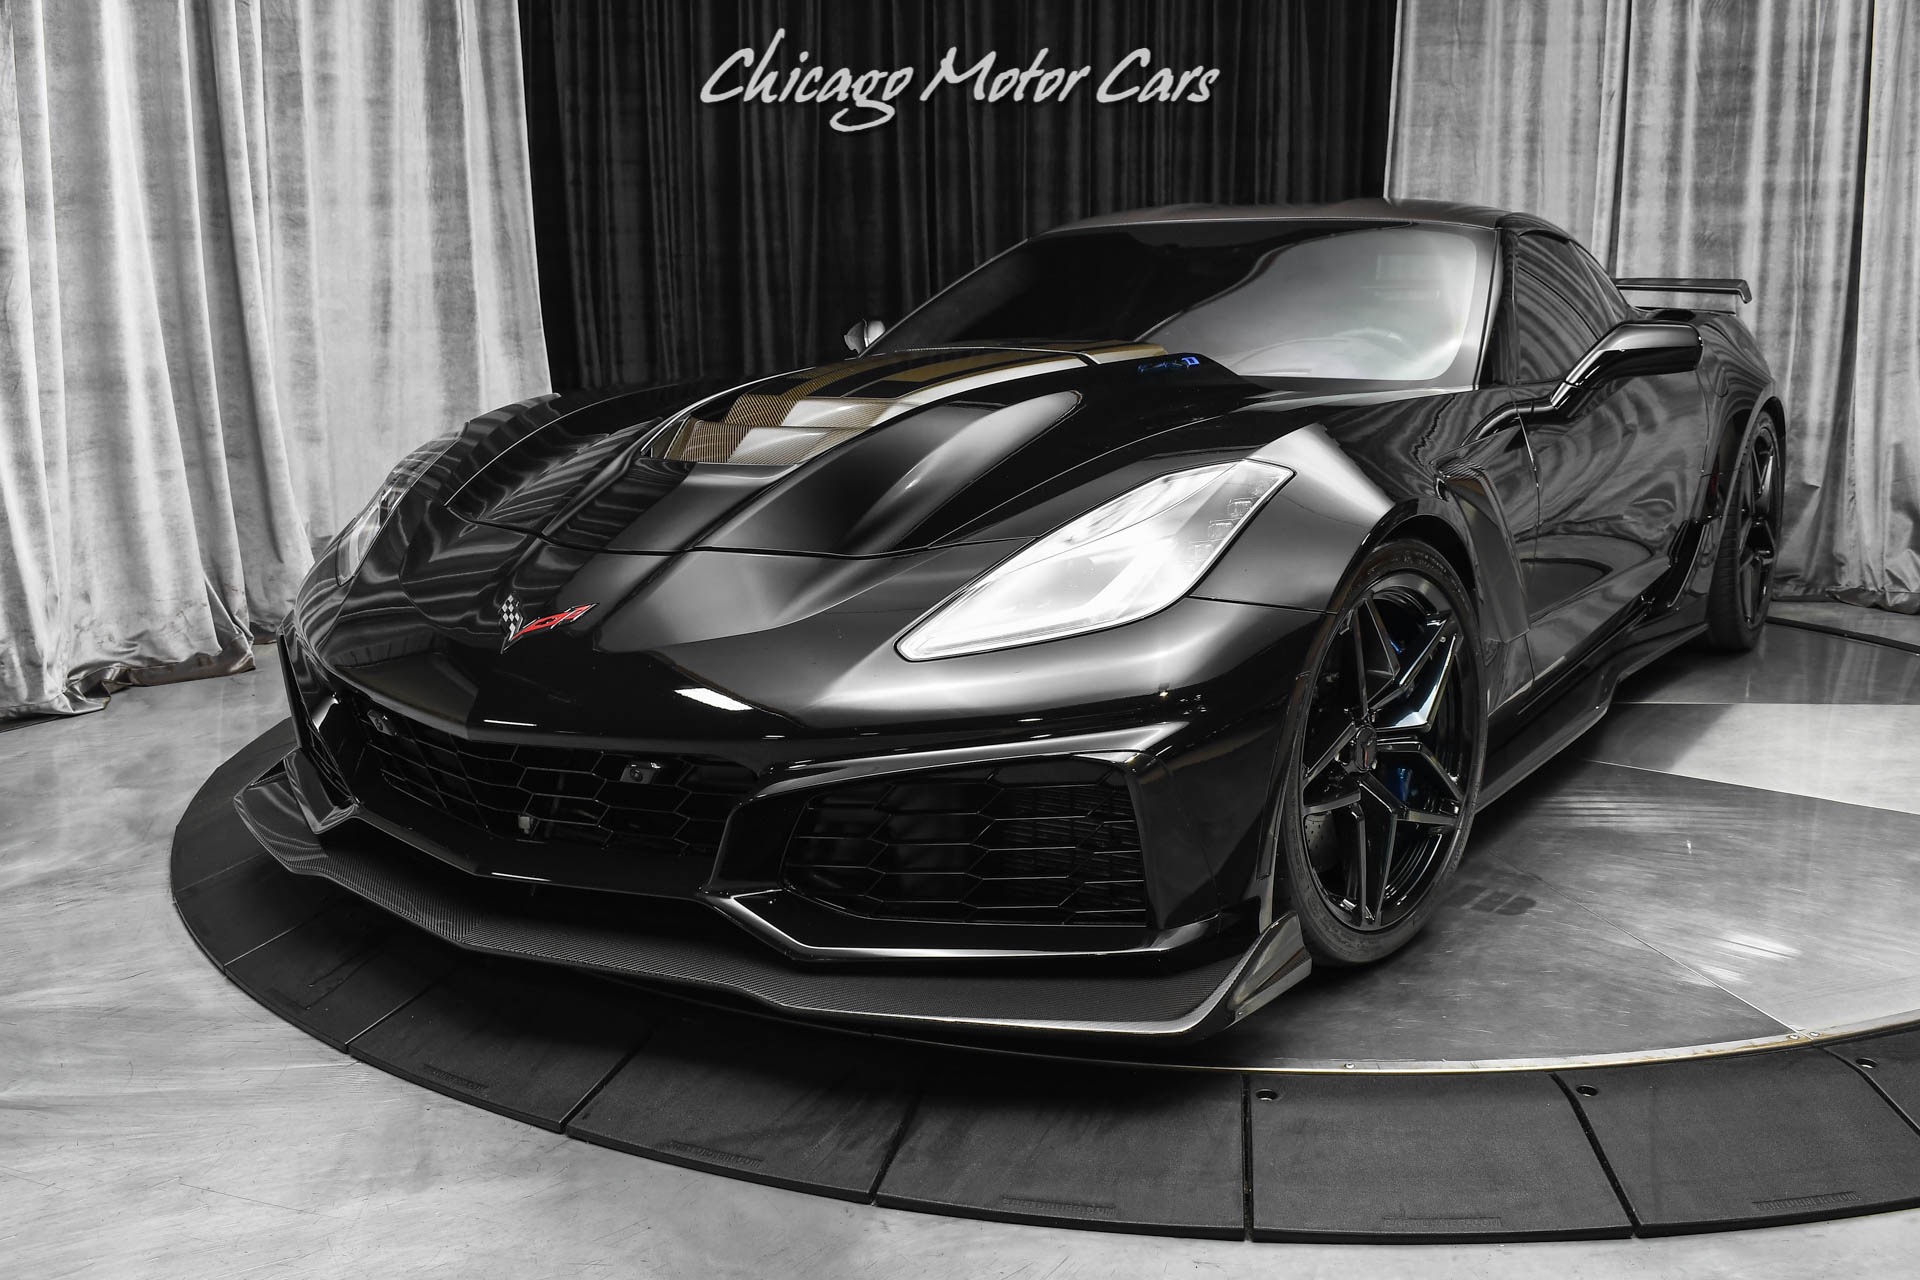 Used-2019-Chevrolet-Corvette-ZR1-3ZR-850-Horsepower-Headers-Corsa-Exhaust-Pulley-and-More